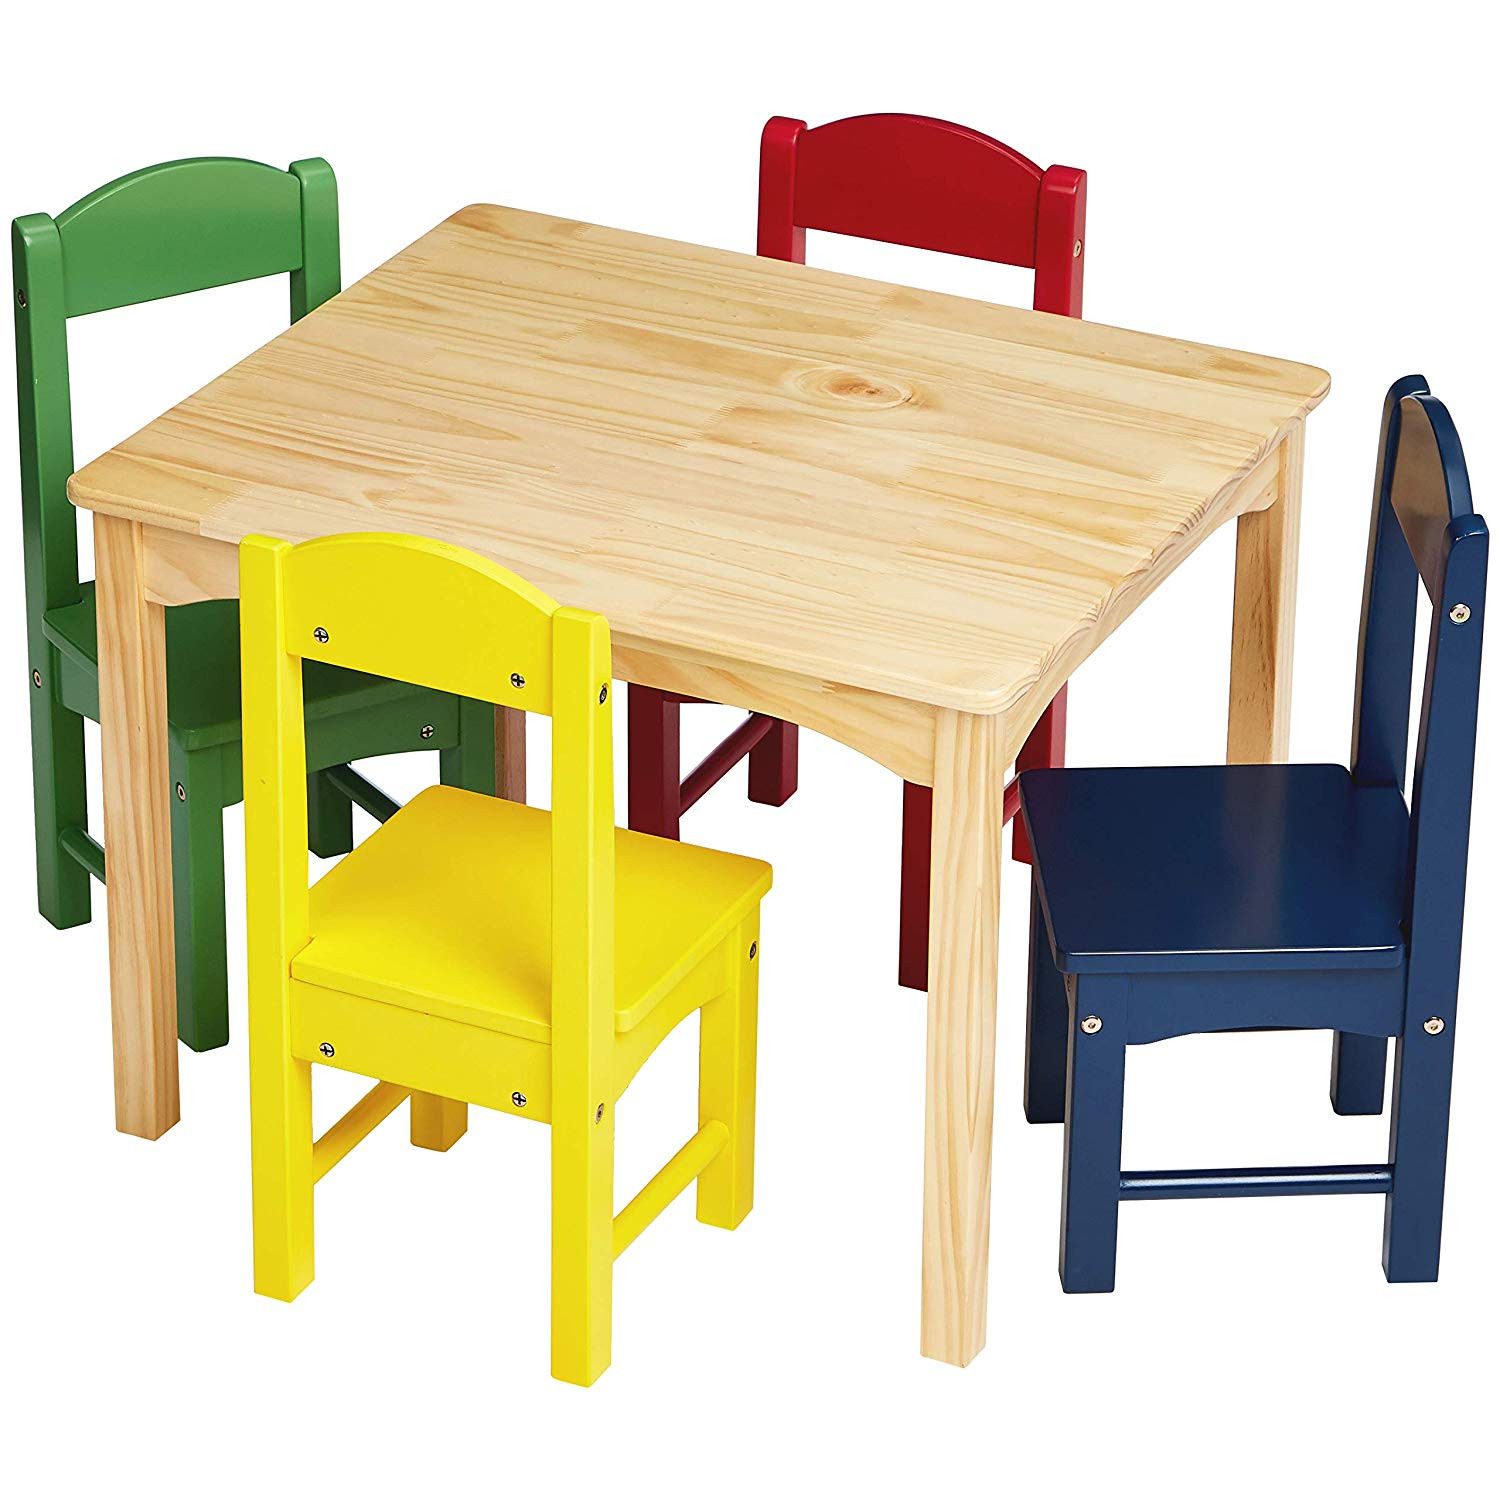 Amazon Kids Table And Chairs
 The Best Kids Tables & Chairs You Can Buy on Amazon – SheKnows